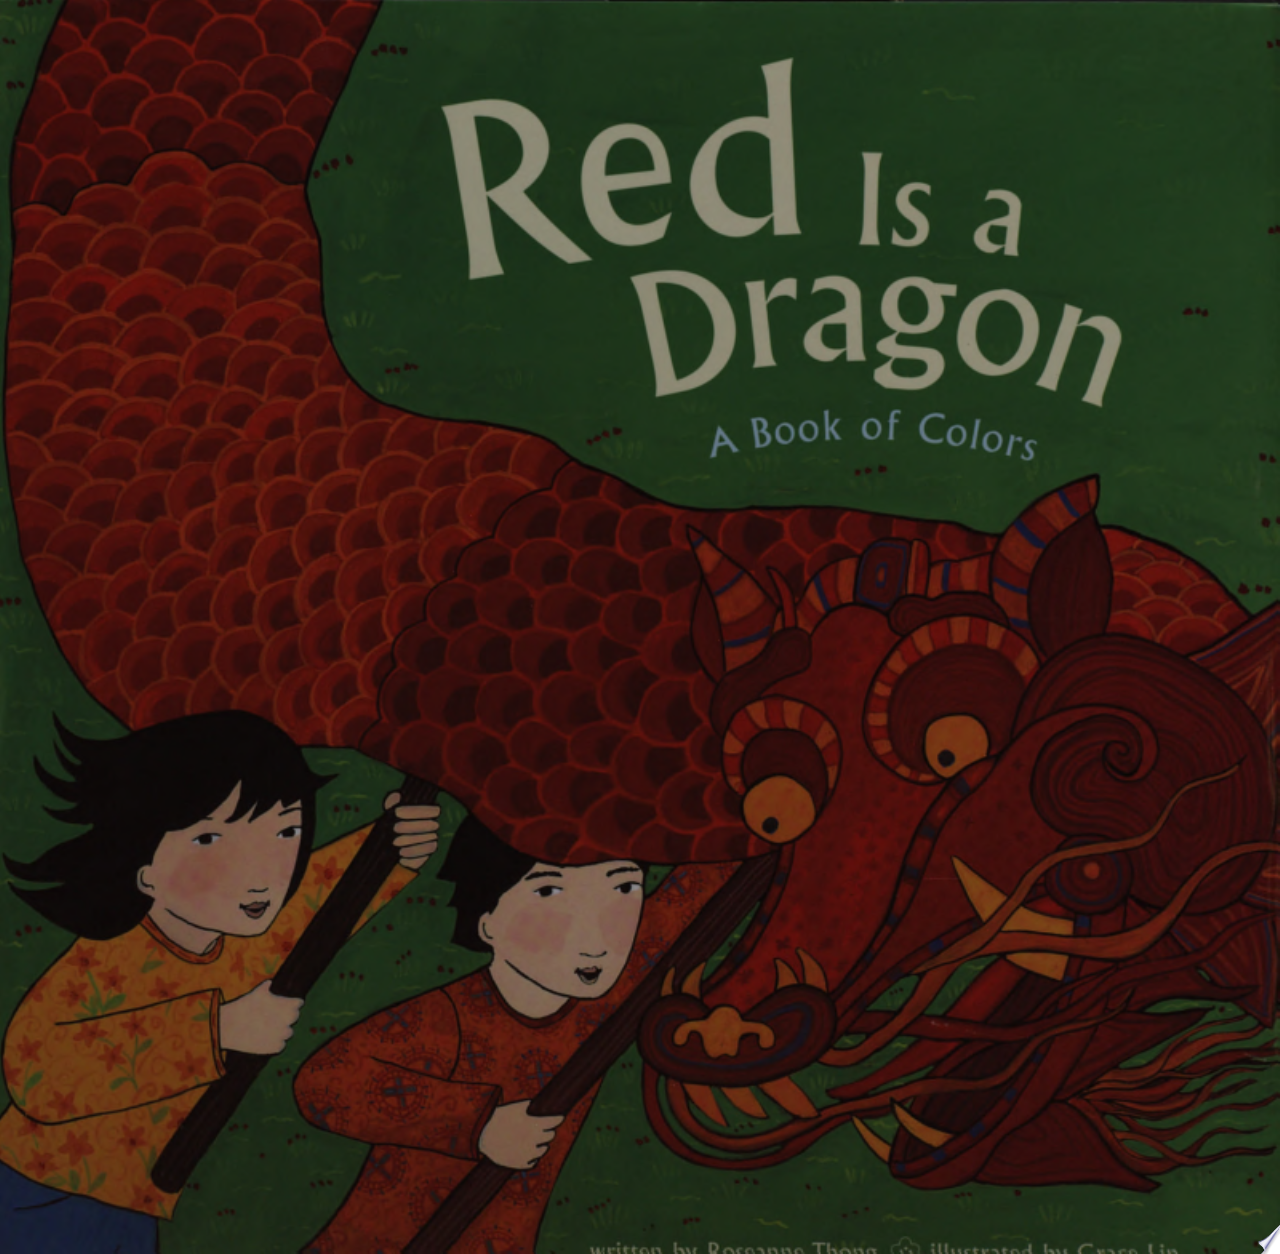 Image for "Red is a Dragon"